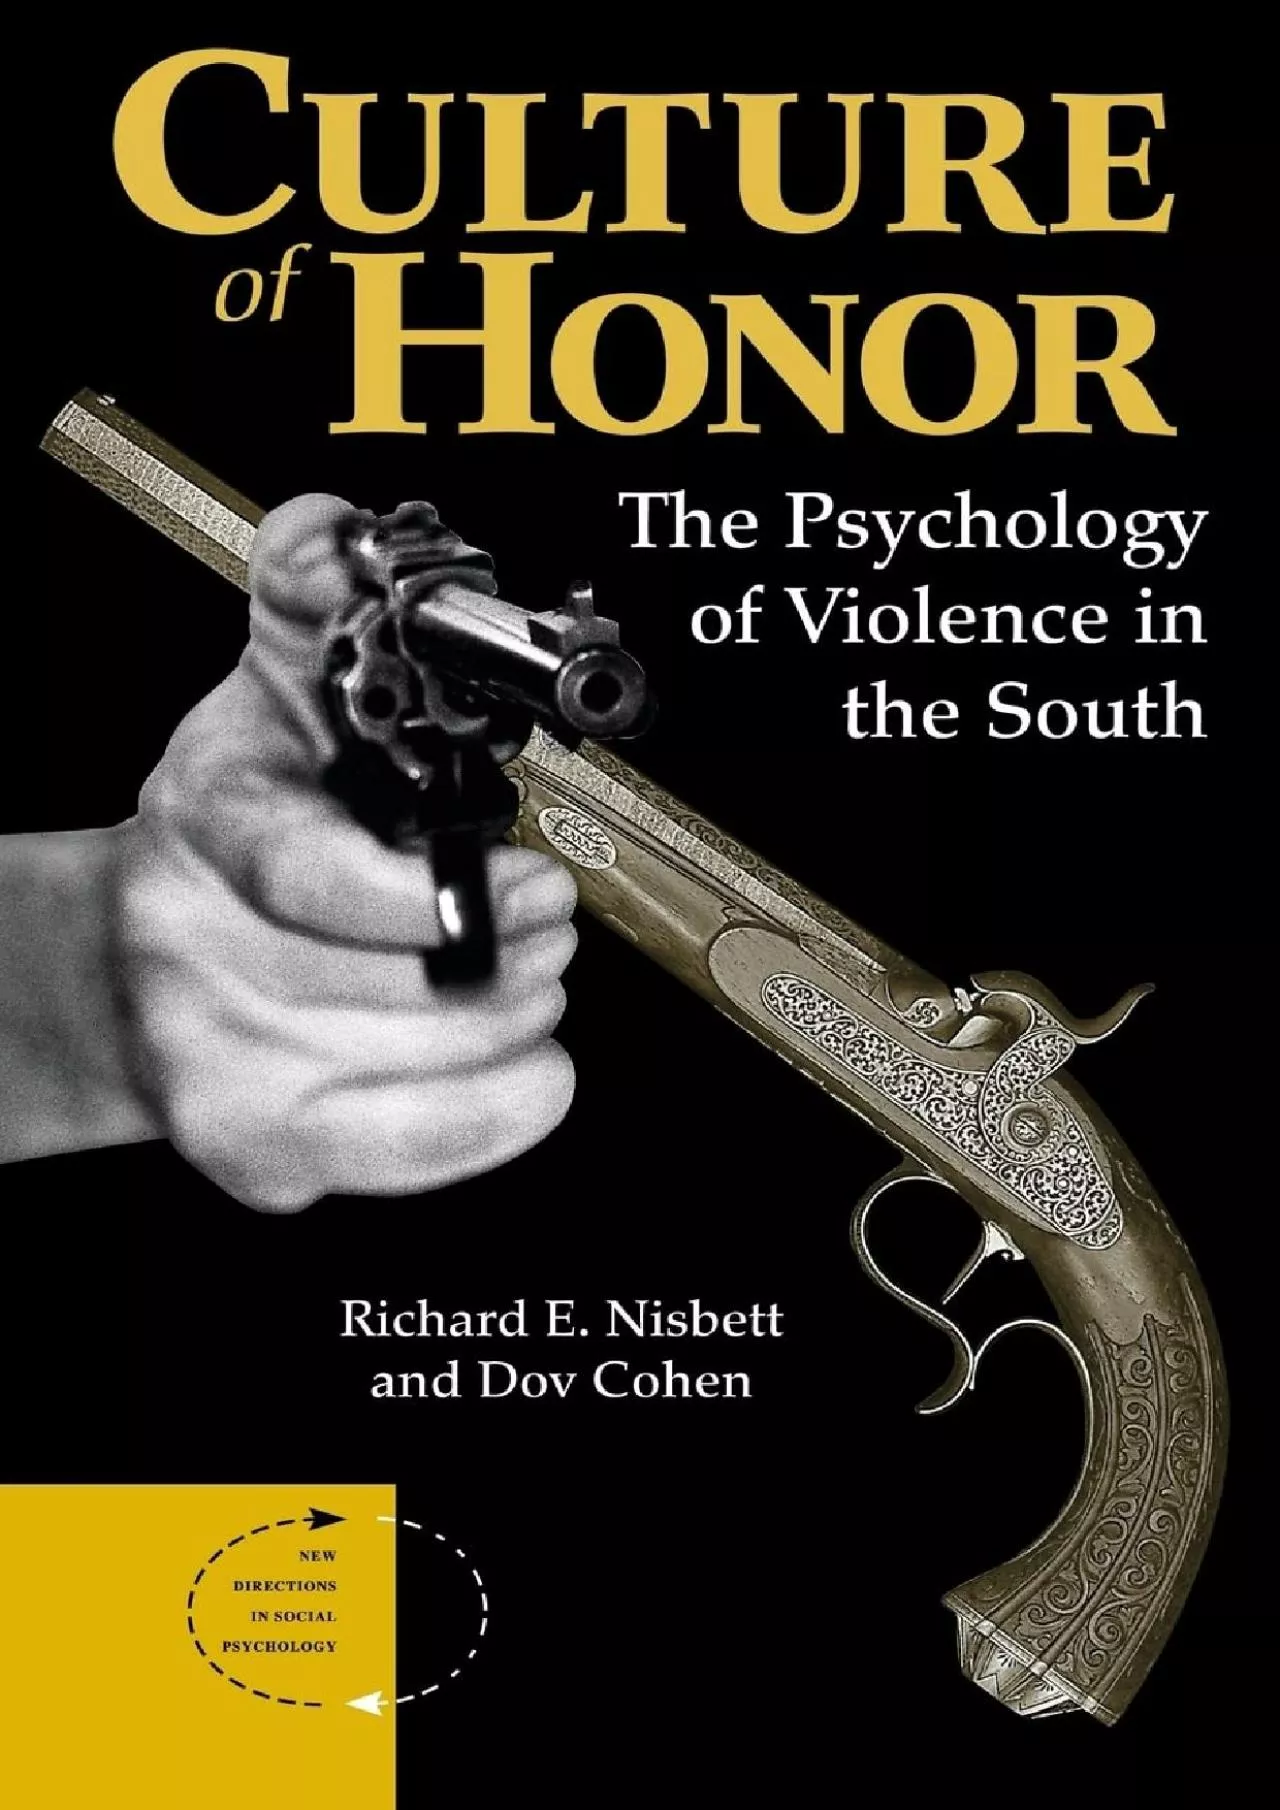 (BOOK)-Culture of Honor: The Psychology of Violence in the South (New Directions in Social